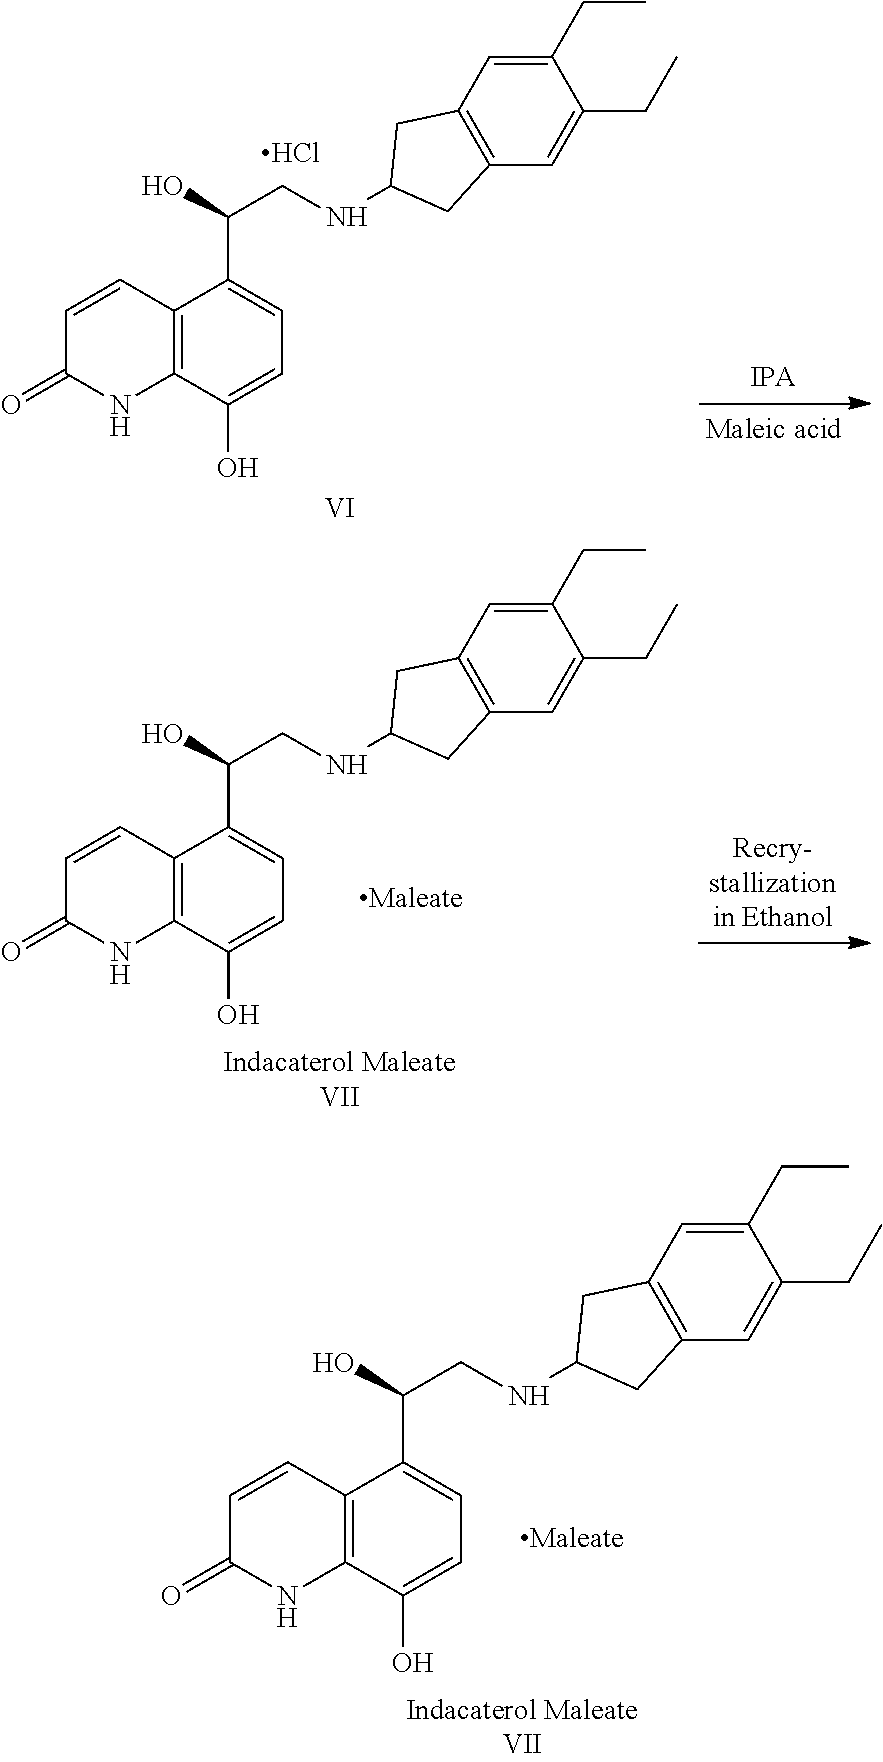 Process for preparation of indacaterol or its pharmaceutically acceptable salts